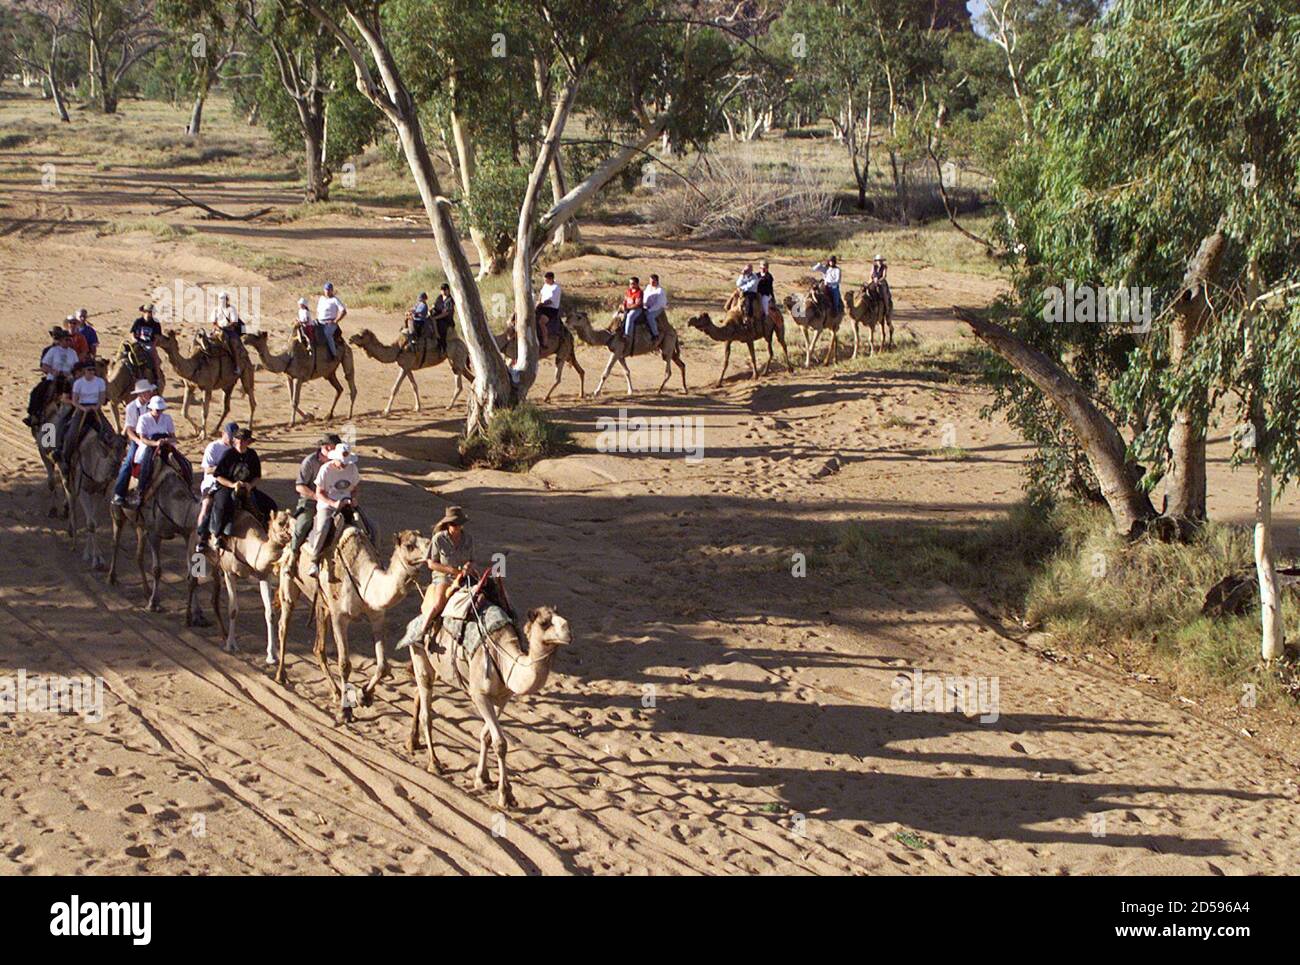 American, Mexican and Australian tourists ride camels past river gum trees on the dry bed of the Todd River near Alice Springs December 30. An enterprising tour a